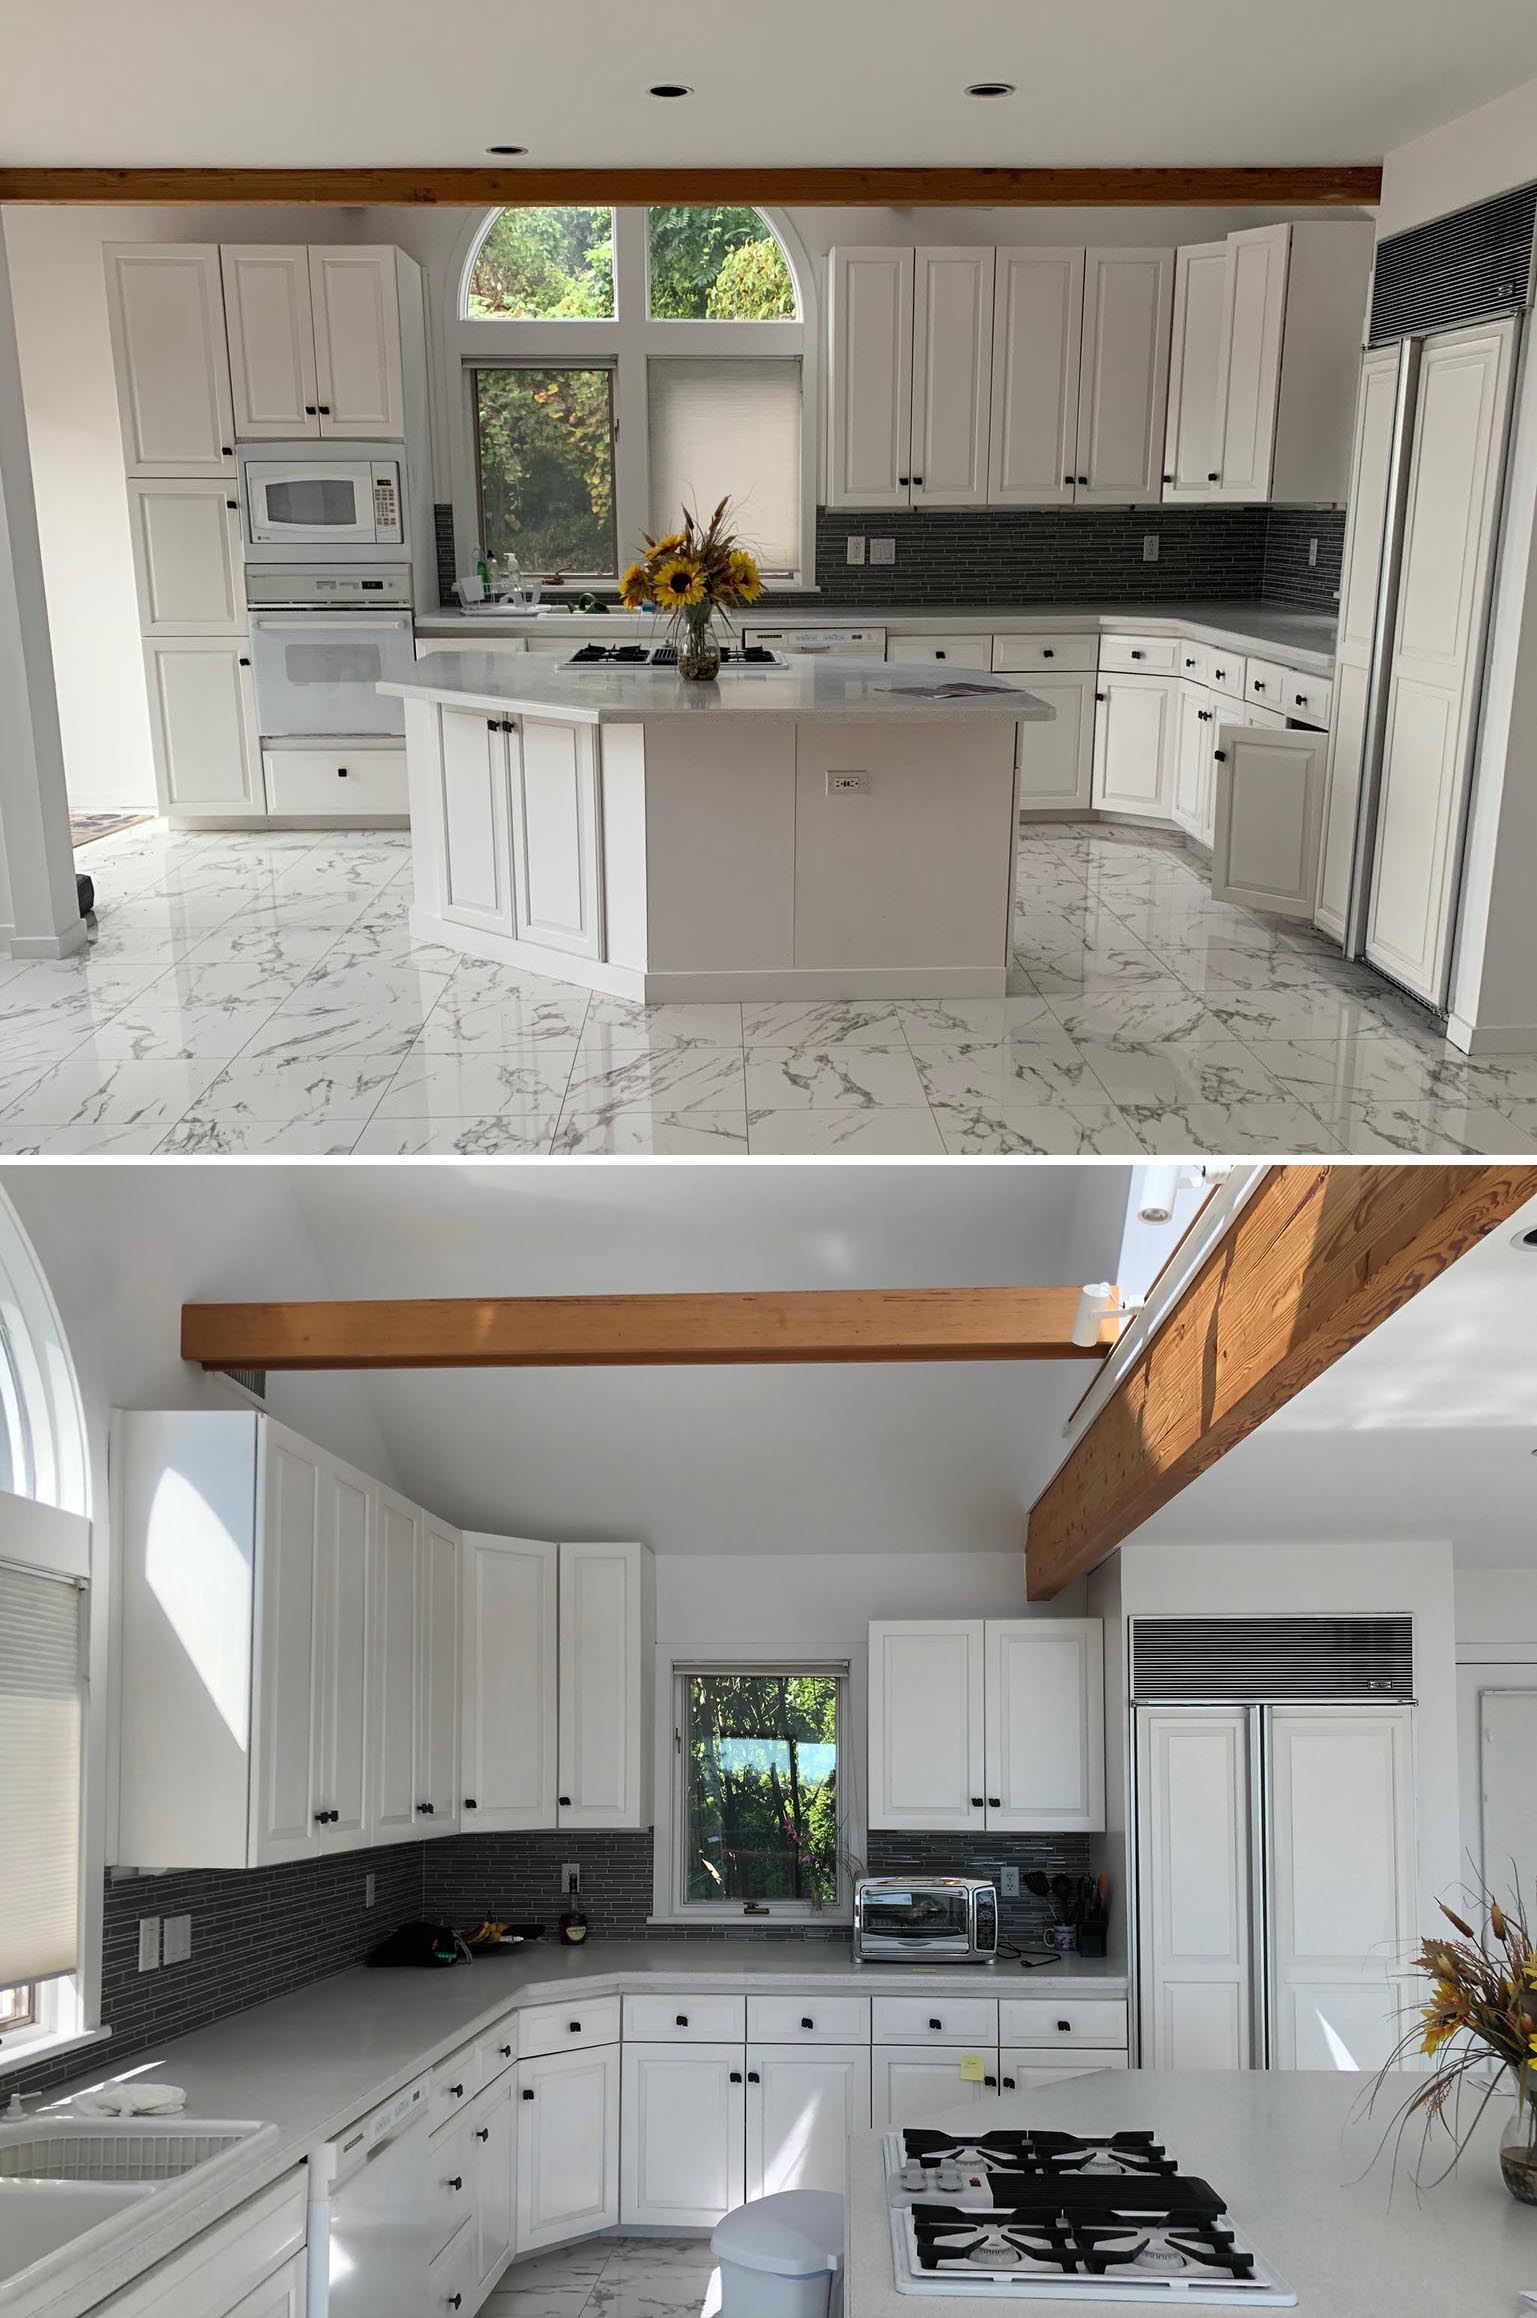 This original 1980s kitchen was outdated with old appliances and an uniquely shaped island. It was remodeled and transformed into a contemporary kitchen.